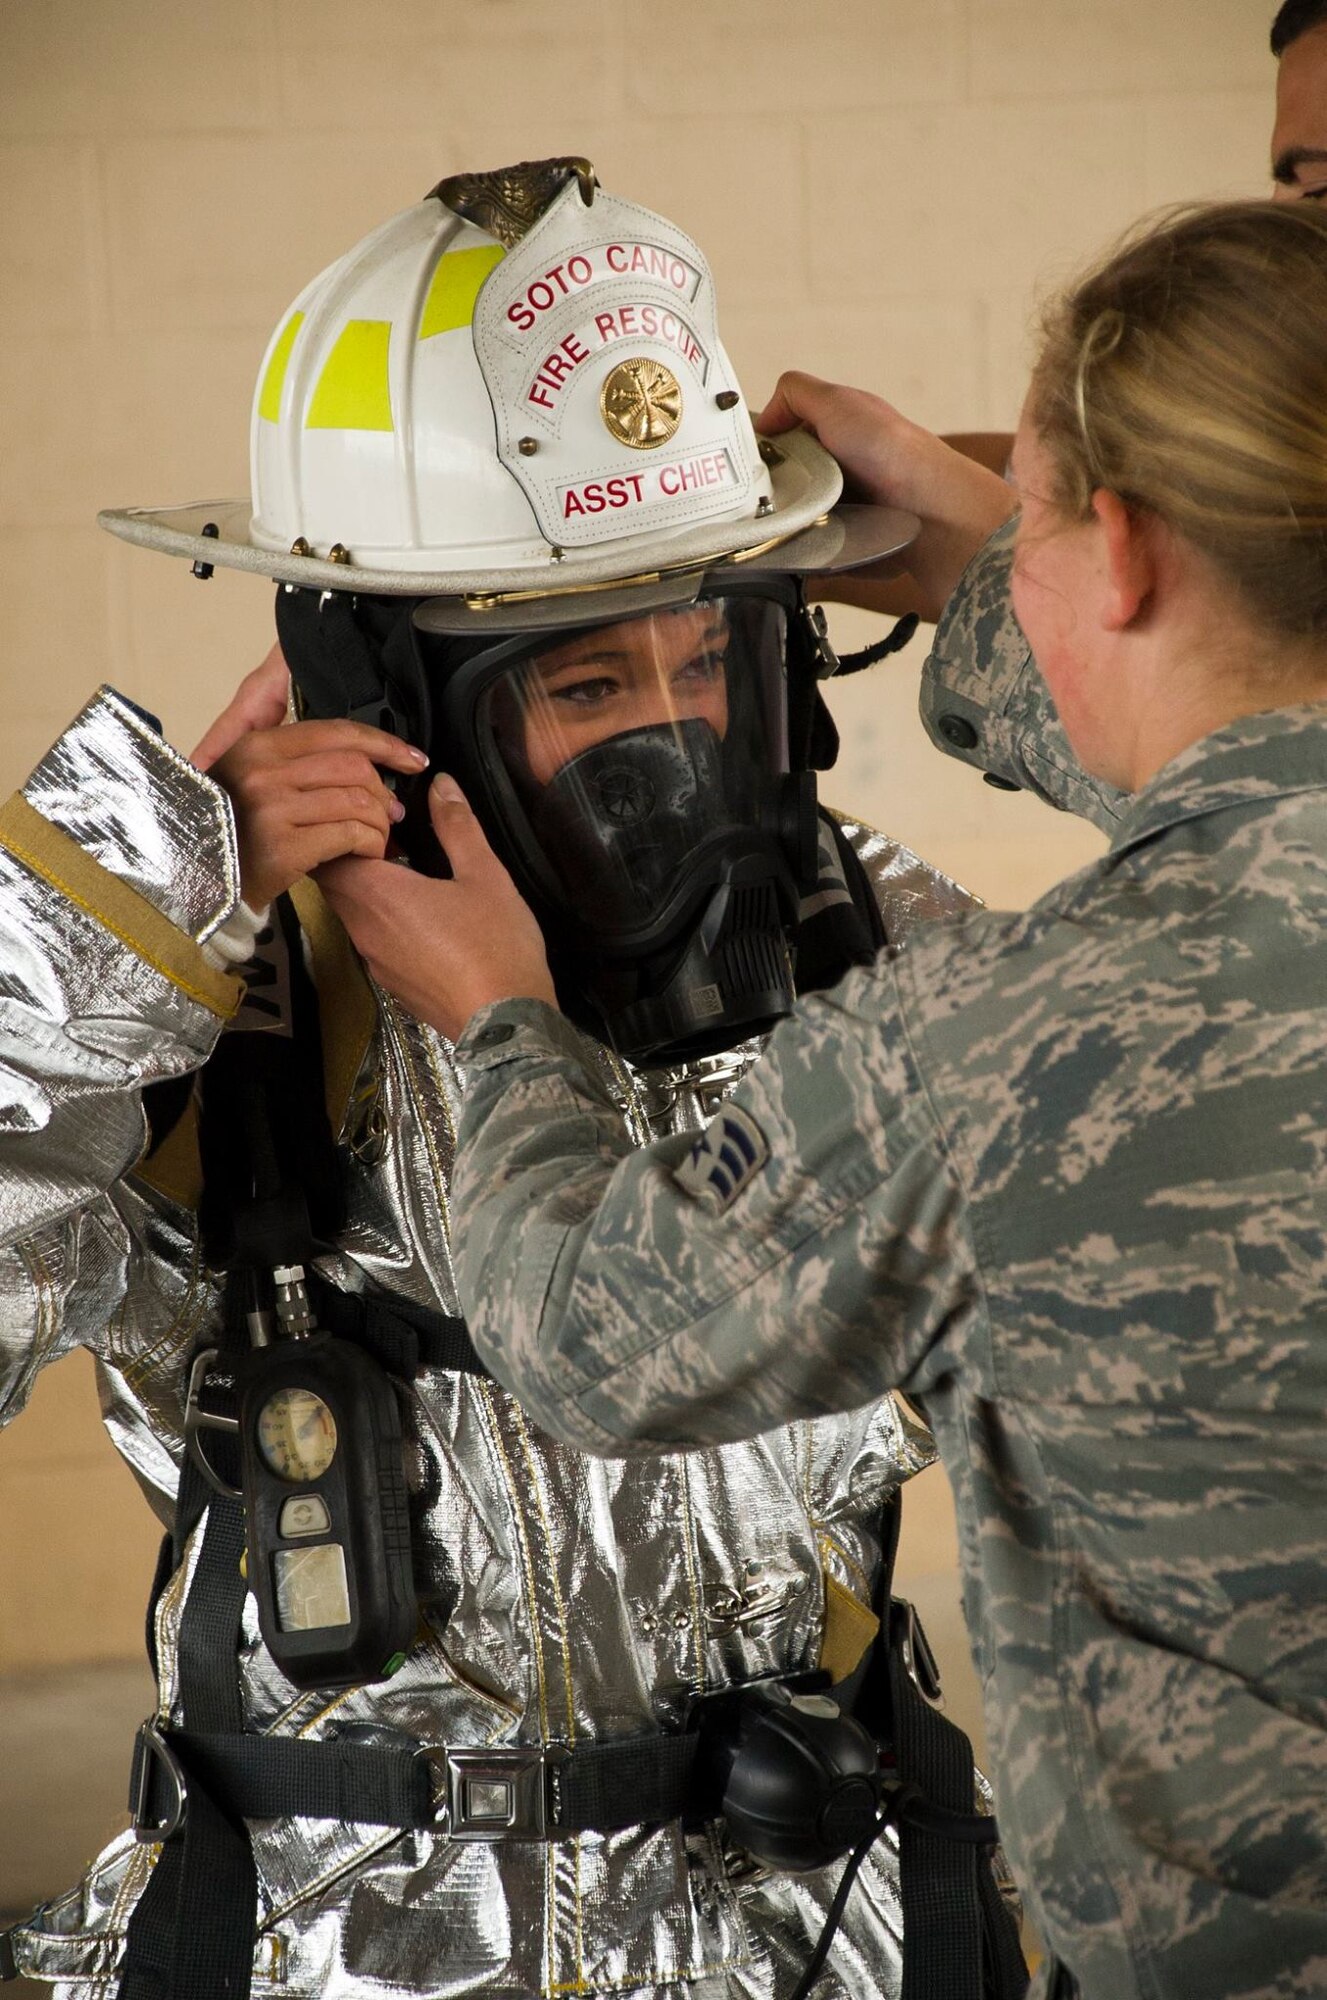 Senior Airman Adrianna Hopkins, 612th Air Base Squadron firefighter helps Cassia Gass, Indianapolis Colts cheerleader, don equipment the 612th uses to respond to and fight fires Feb. 7, 2016 at Soto Cano Air Base, Honduras. NFL cheerleaders and players took time to meet with members of the base as a part of a visit to the base hosted by the Armed Forces Entertainment for Super Bowl 50. (U.S. Air Force photo by Capt. Christopher Mesnard/Released)